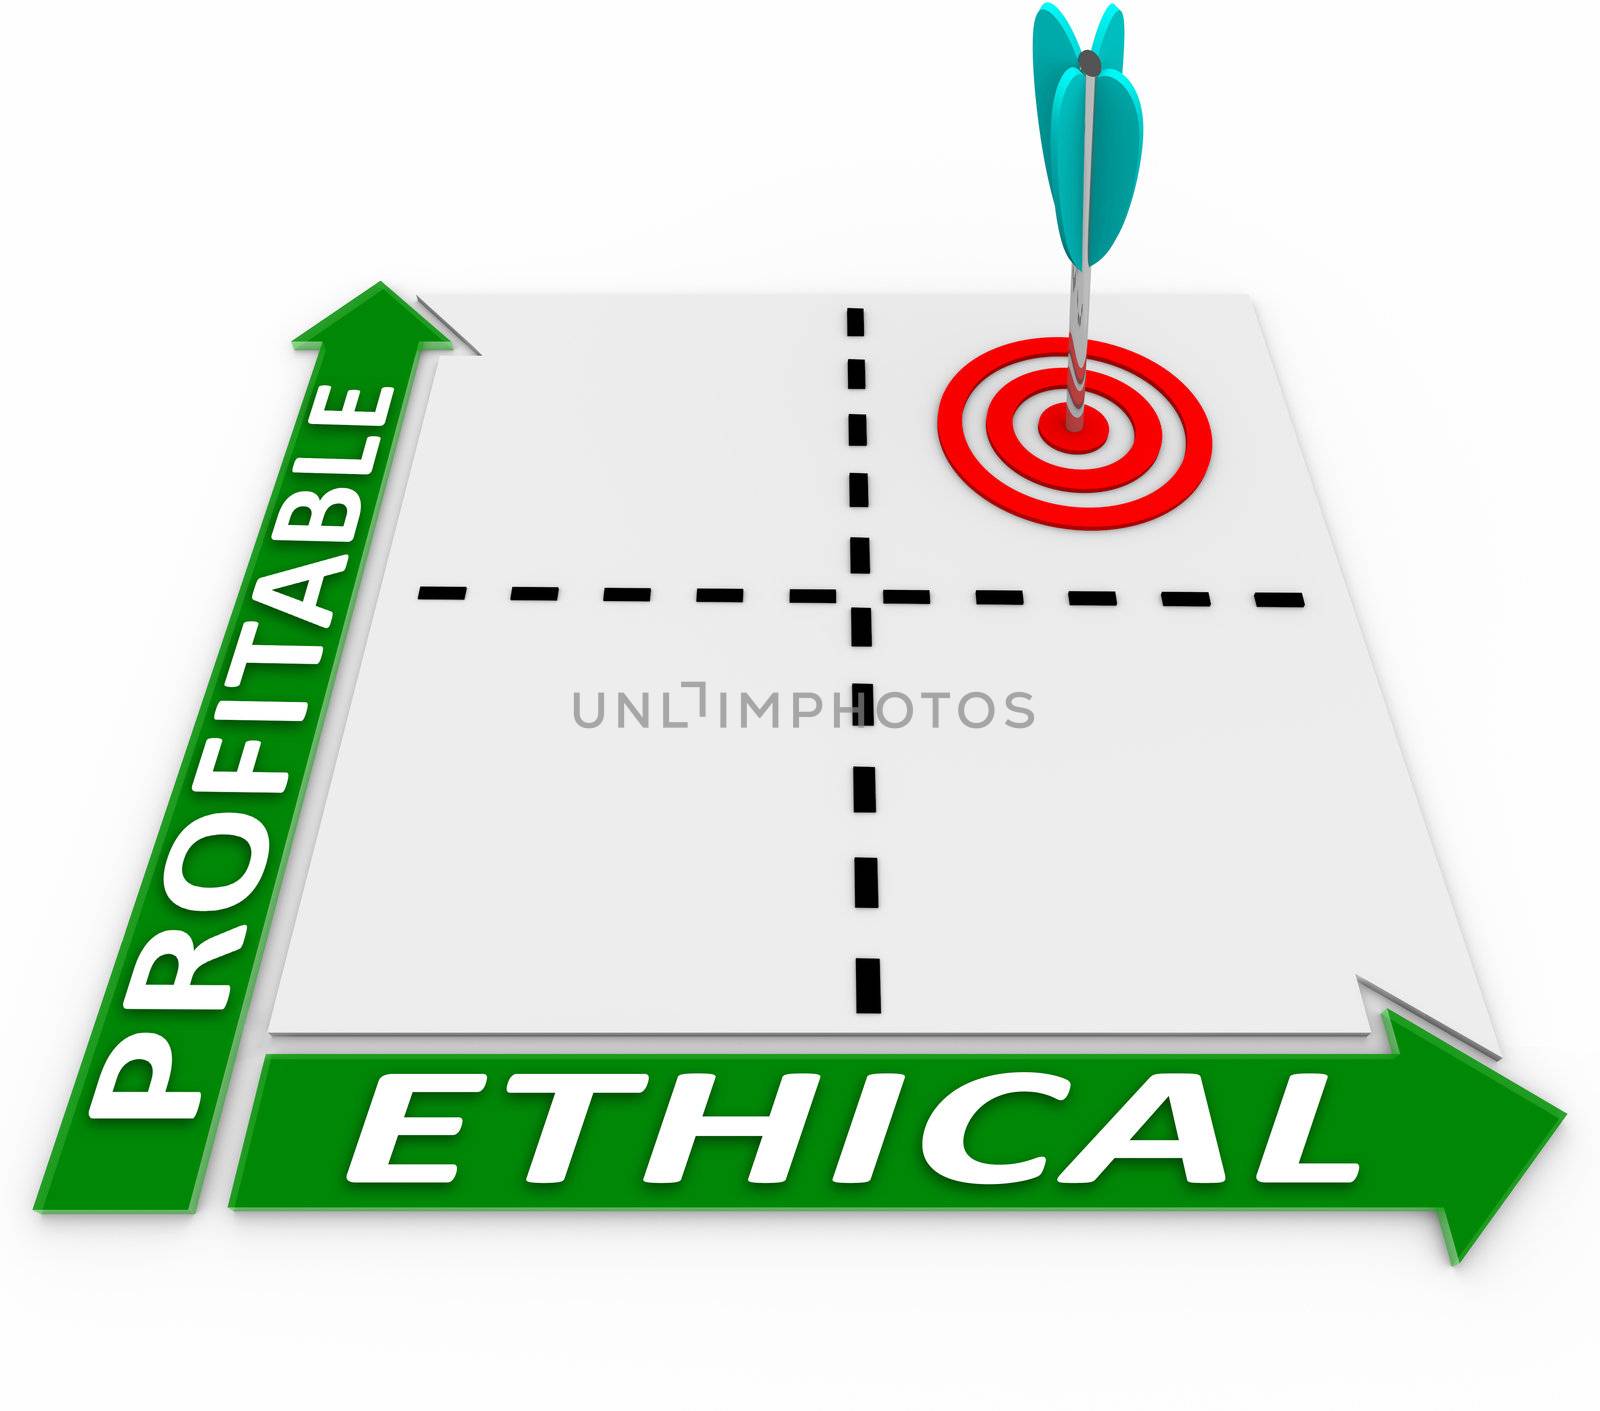 A matrix showing choices for ethical and profitable decisions, with an arrow in a target on the quadrant for the choice that is represents good ethics and profits